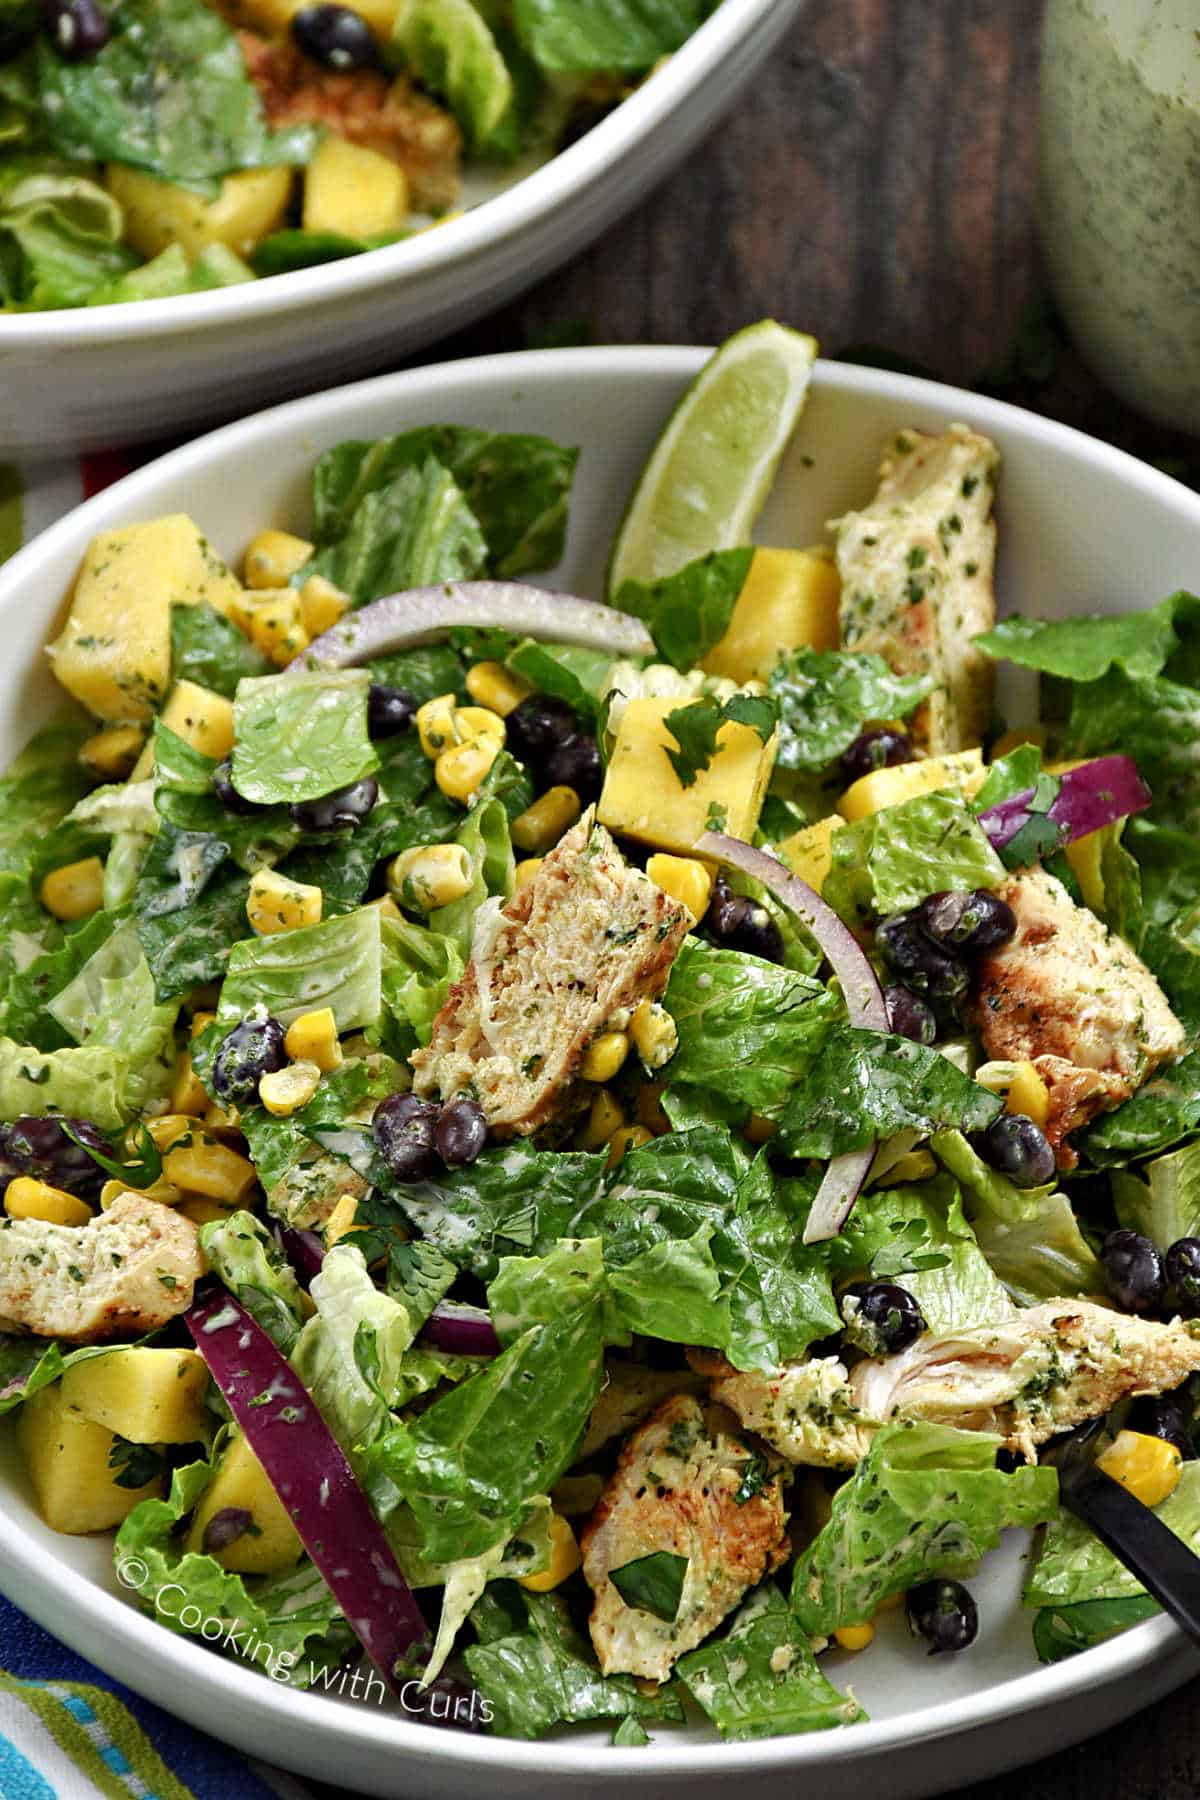 Tossed Southwest Chicken Salad in a bowl tossed with creamy cilantro-lime dressing.